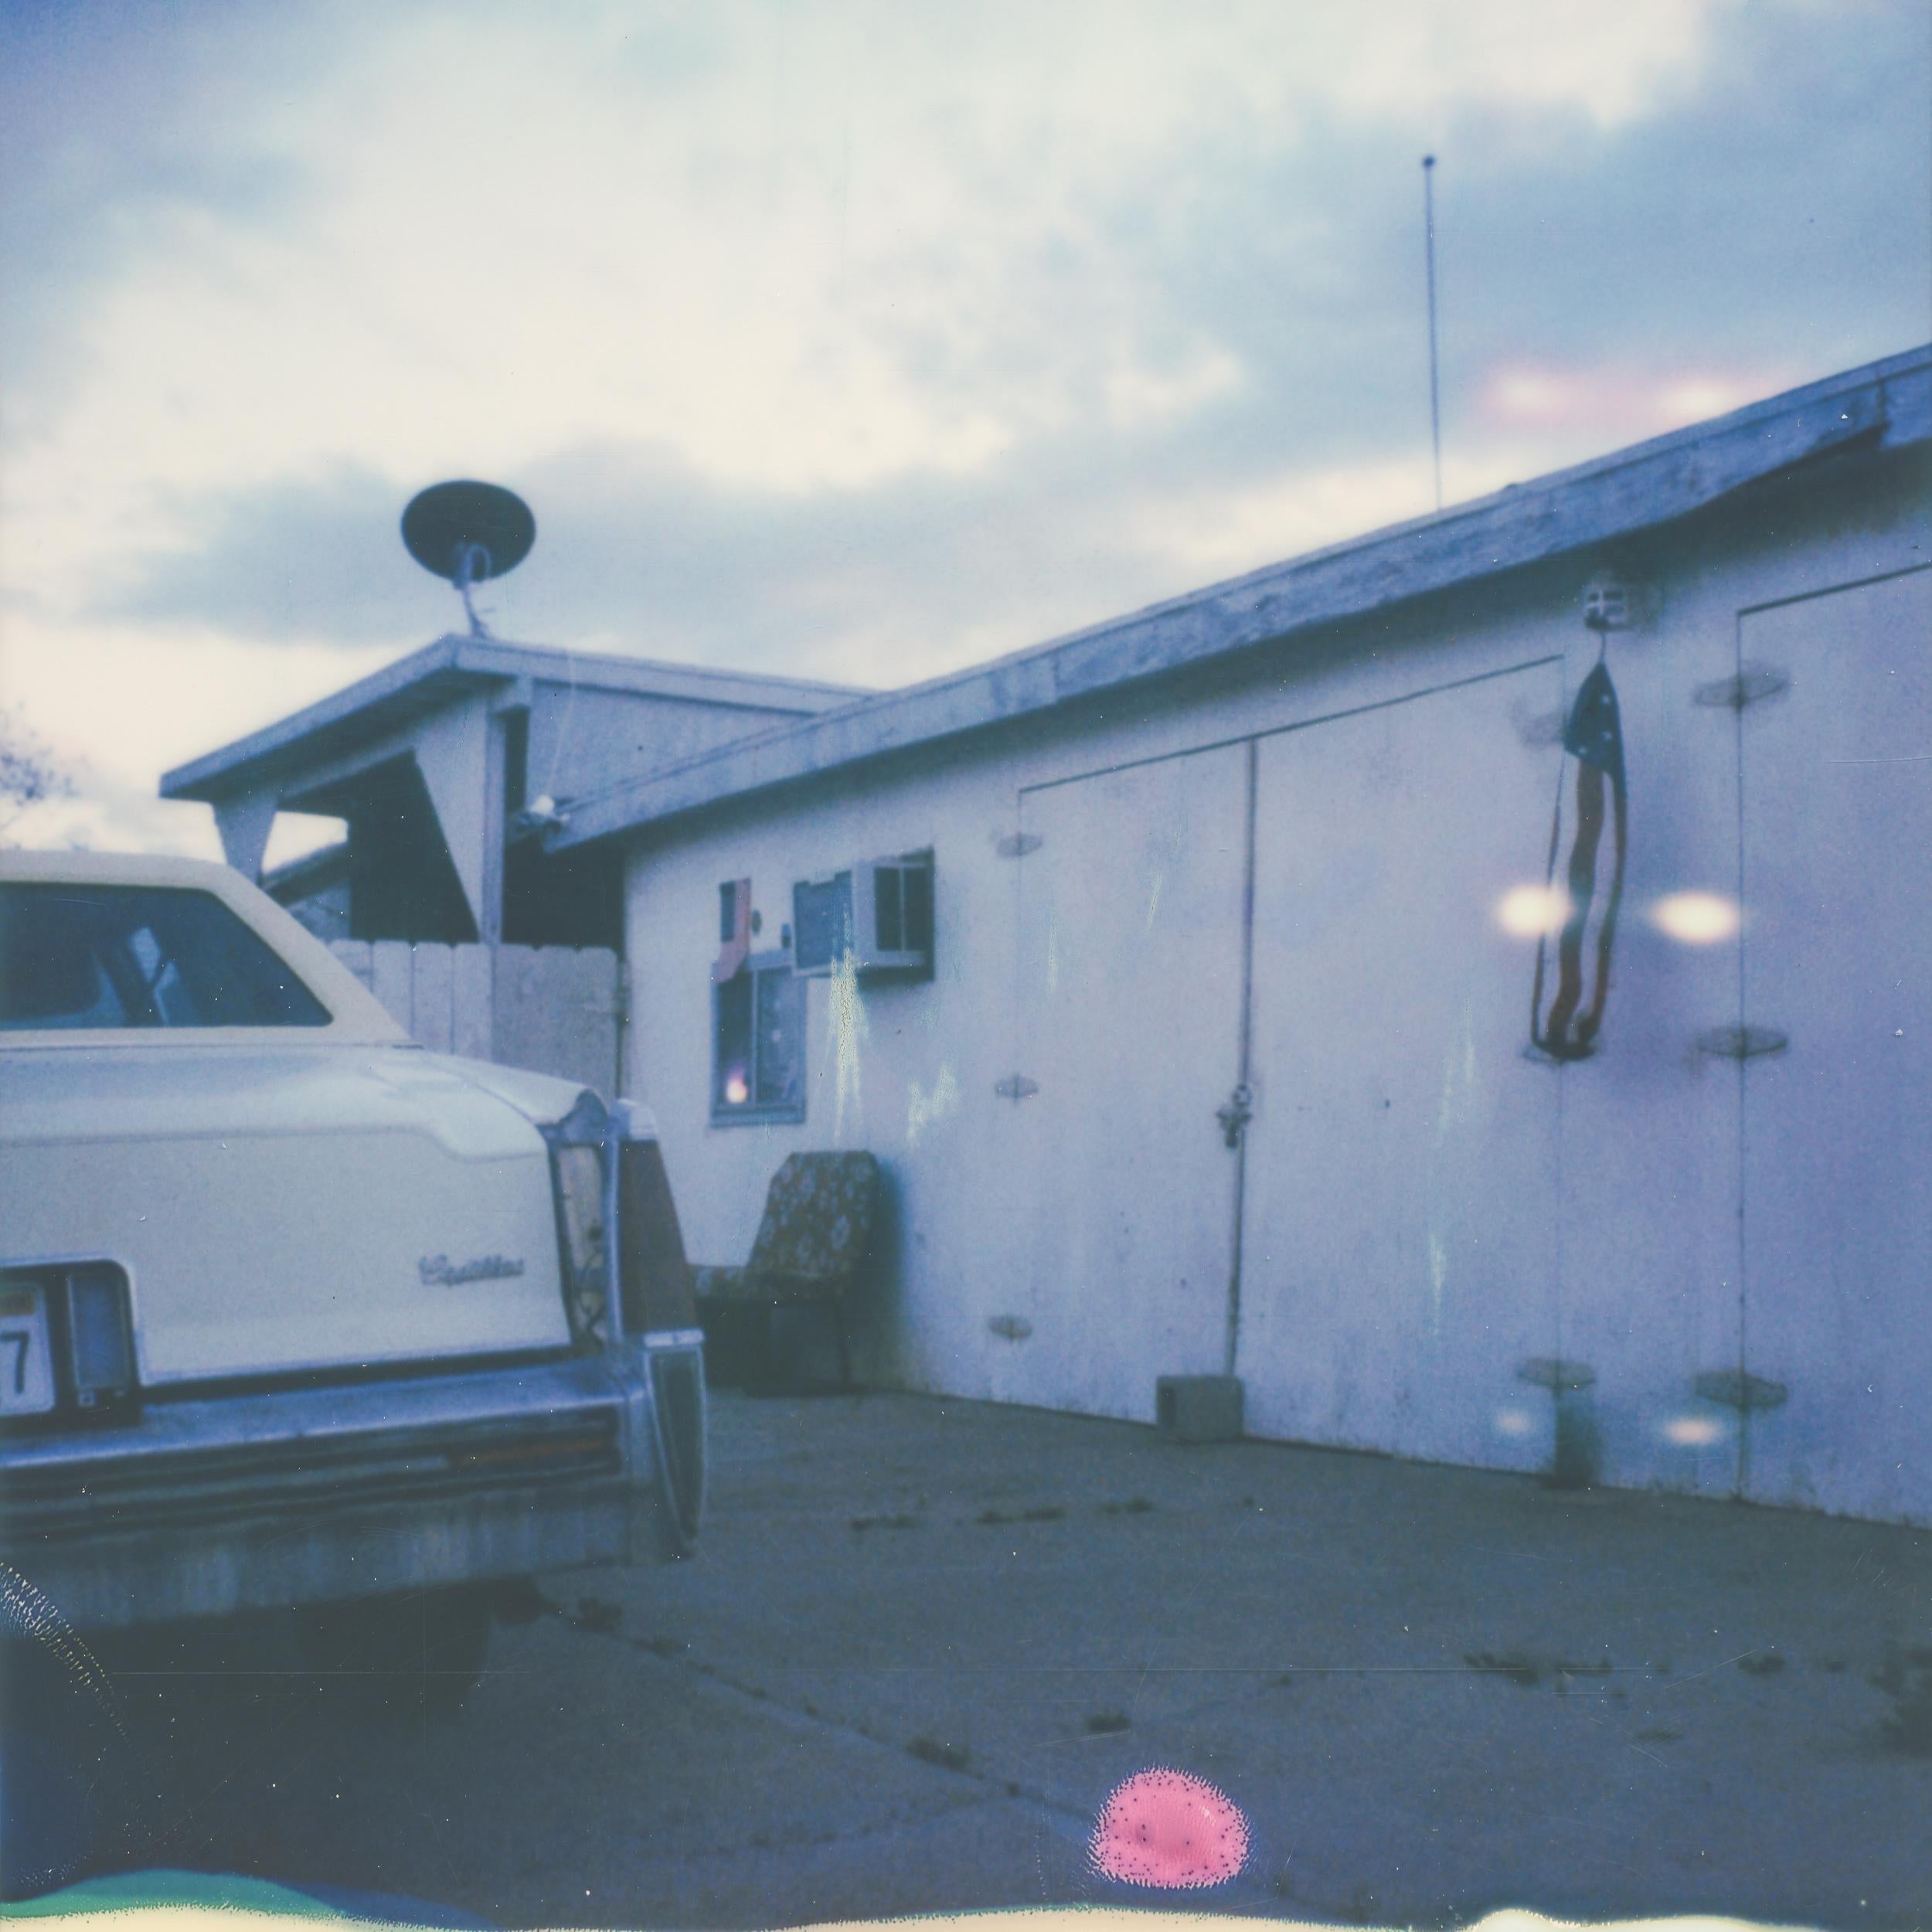 Home is where the heart is -  21st Century, Polaroid, Vintage Cars, Photography